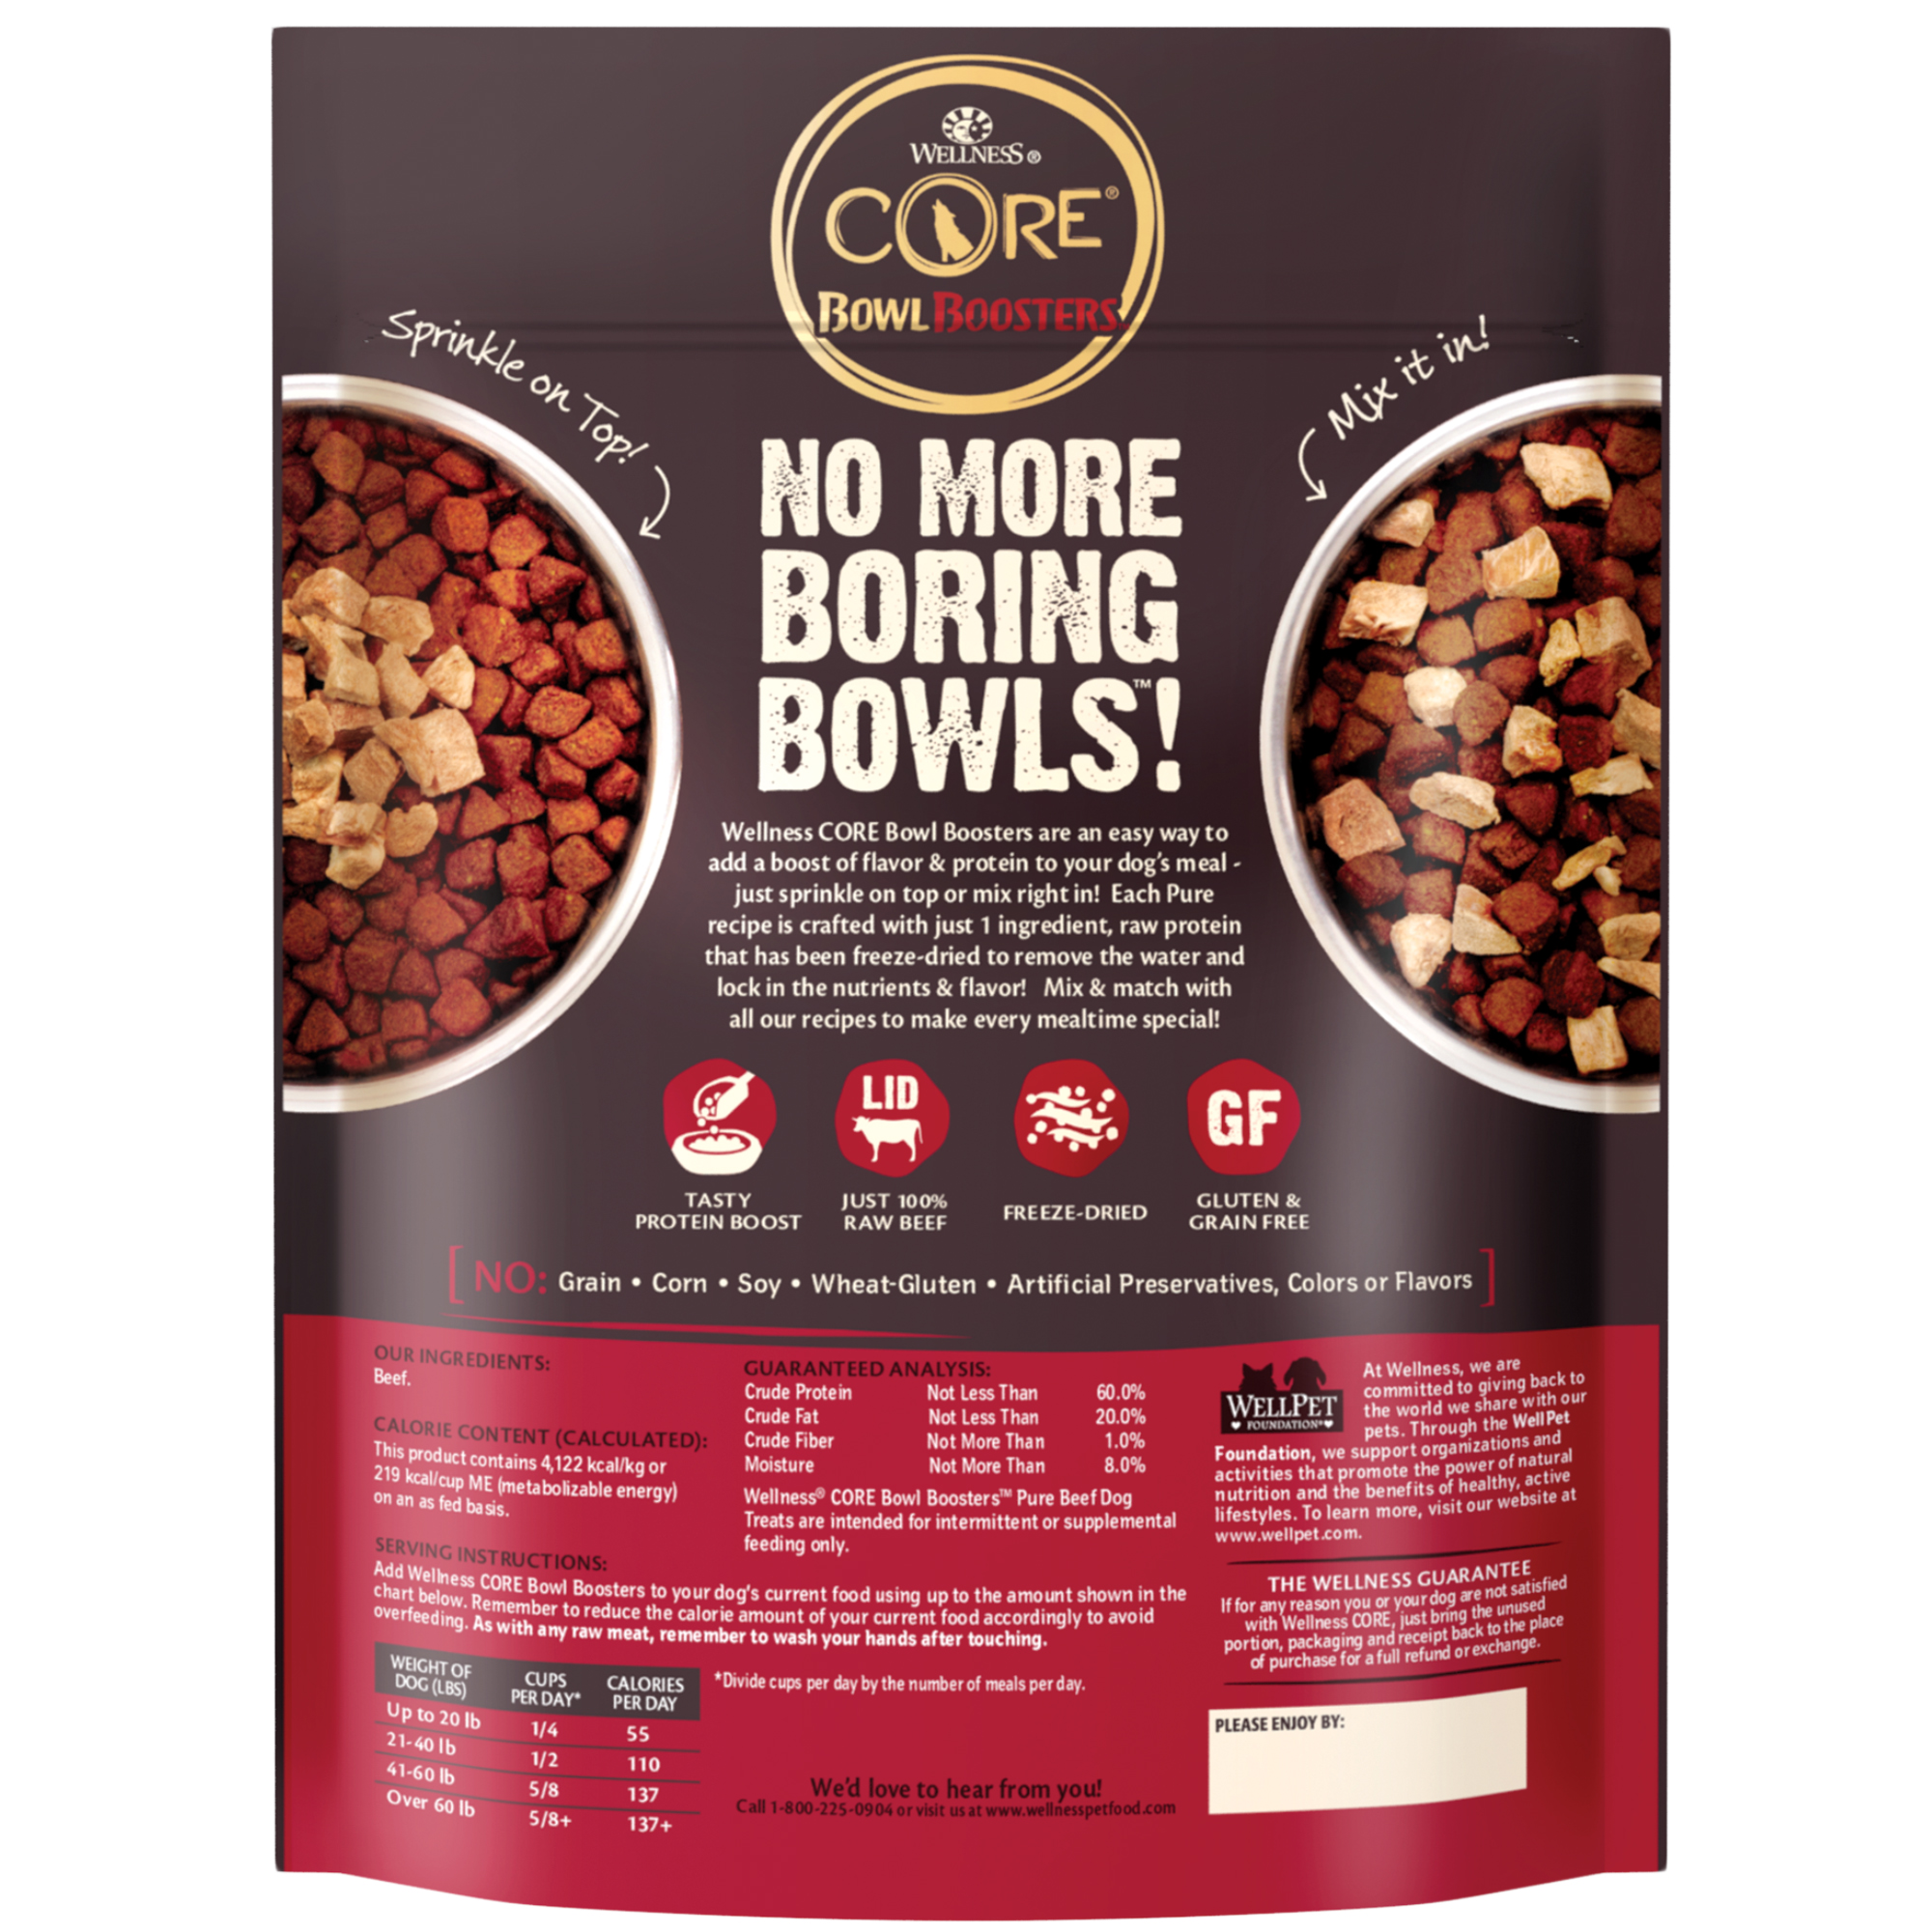 Wellness CORE Natural Bowl Boosters Bare Dog Food Mixer or Topper, Freeze Dried Beef, 4-Ounce Bag - image 4 of 8